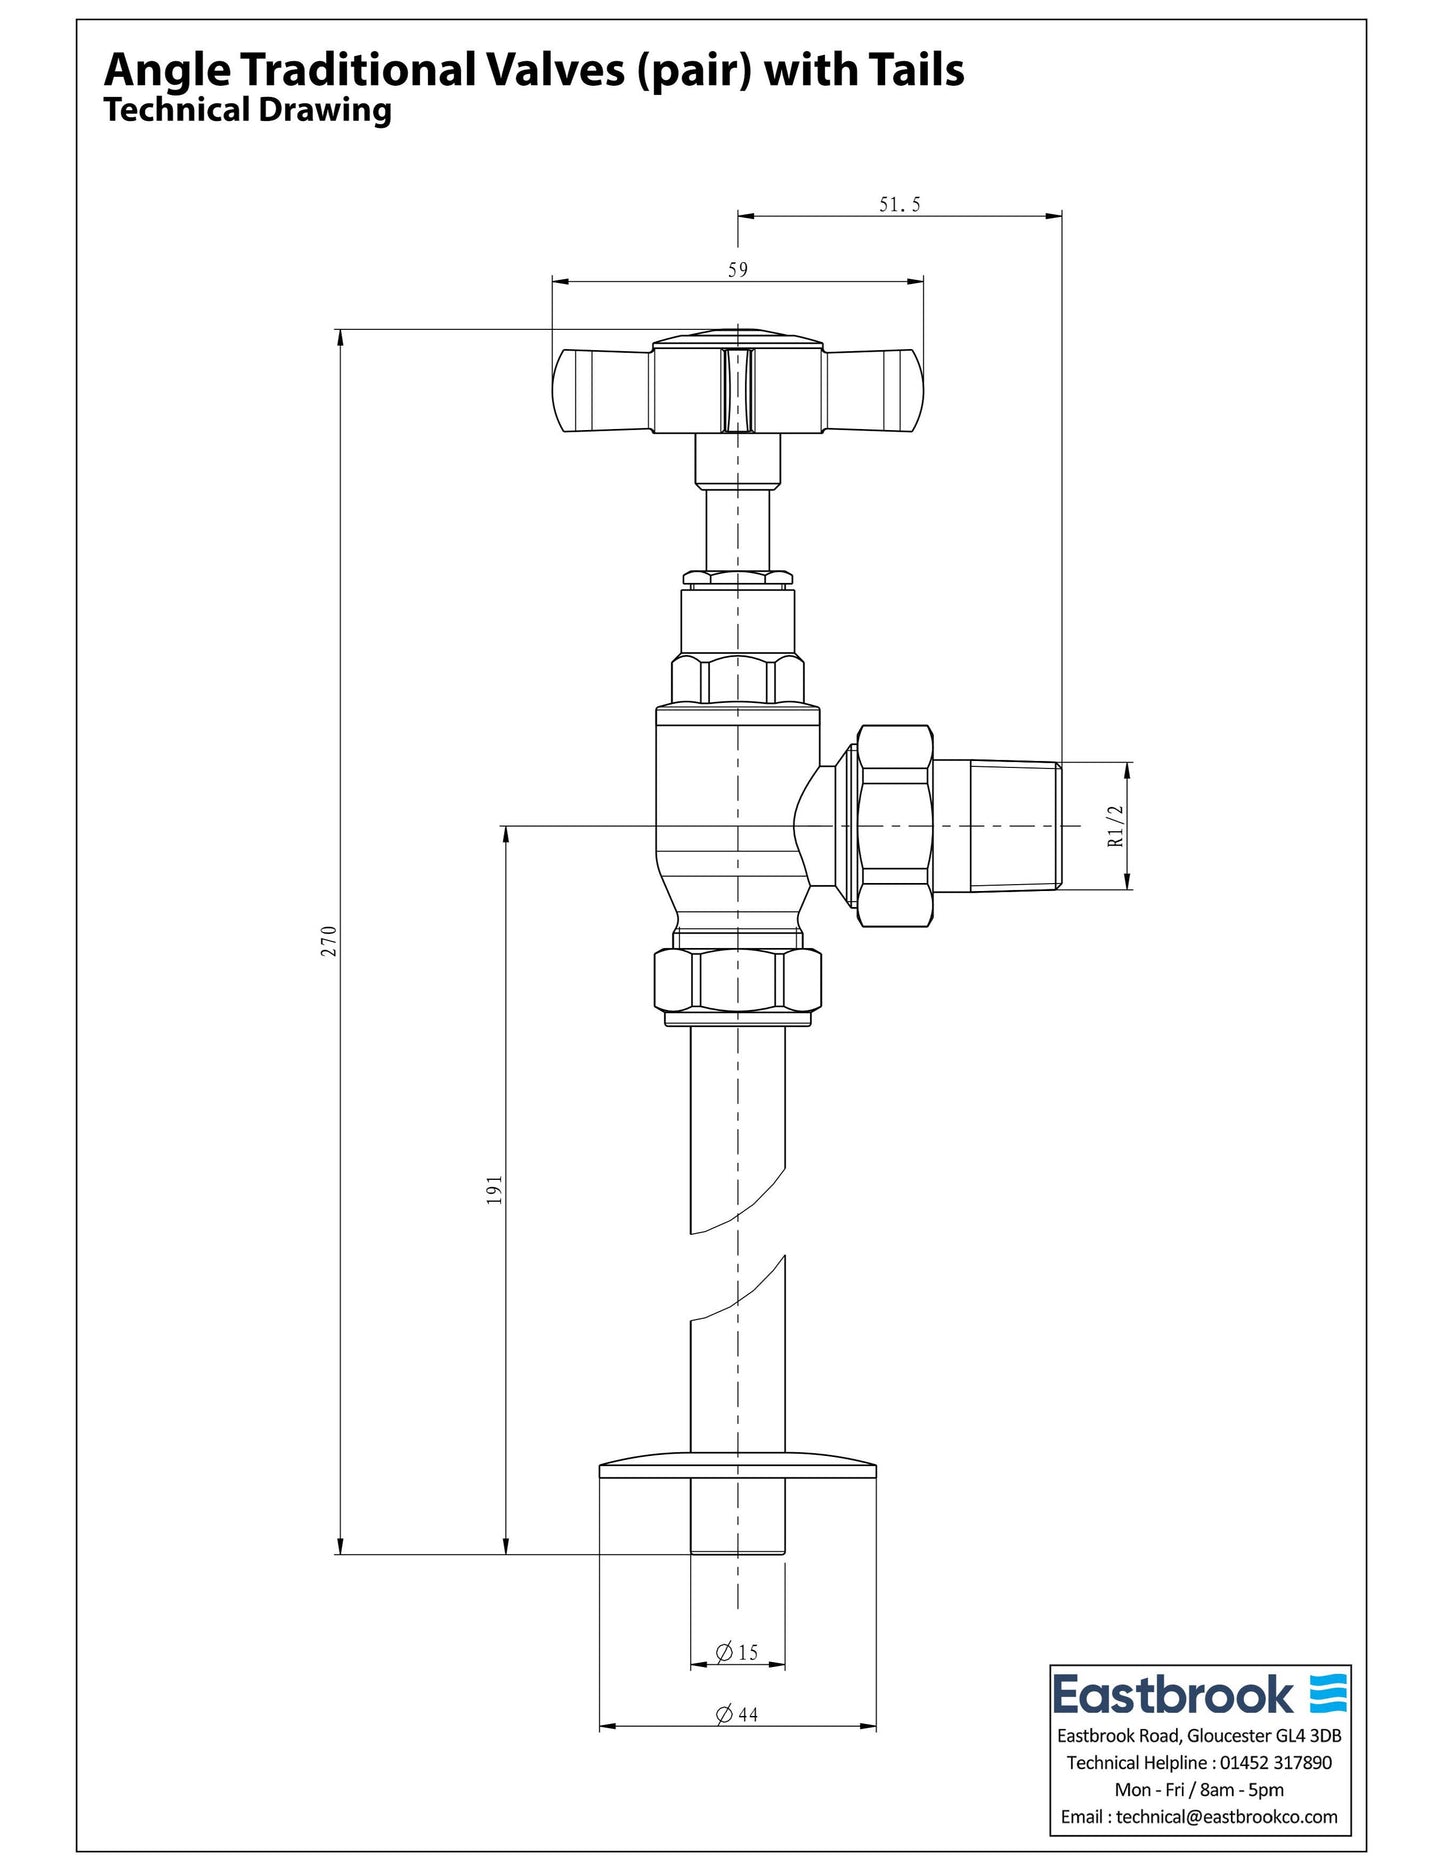 Eastbrook Angled Traditional Valves with Tails (pair) Technical Image 54.0001